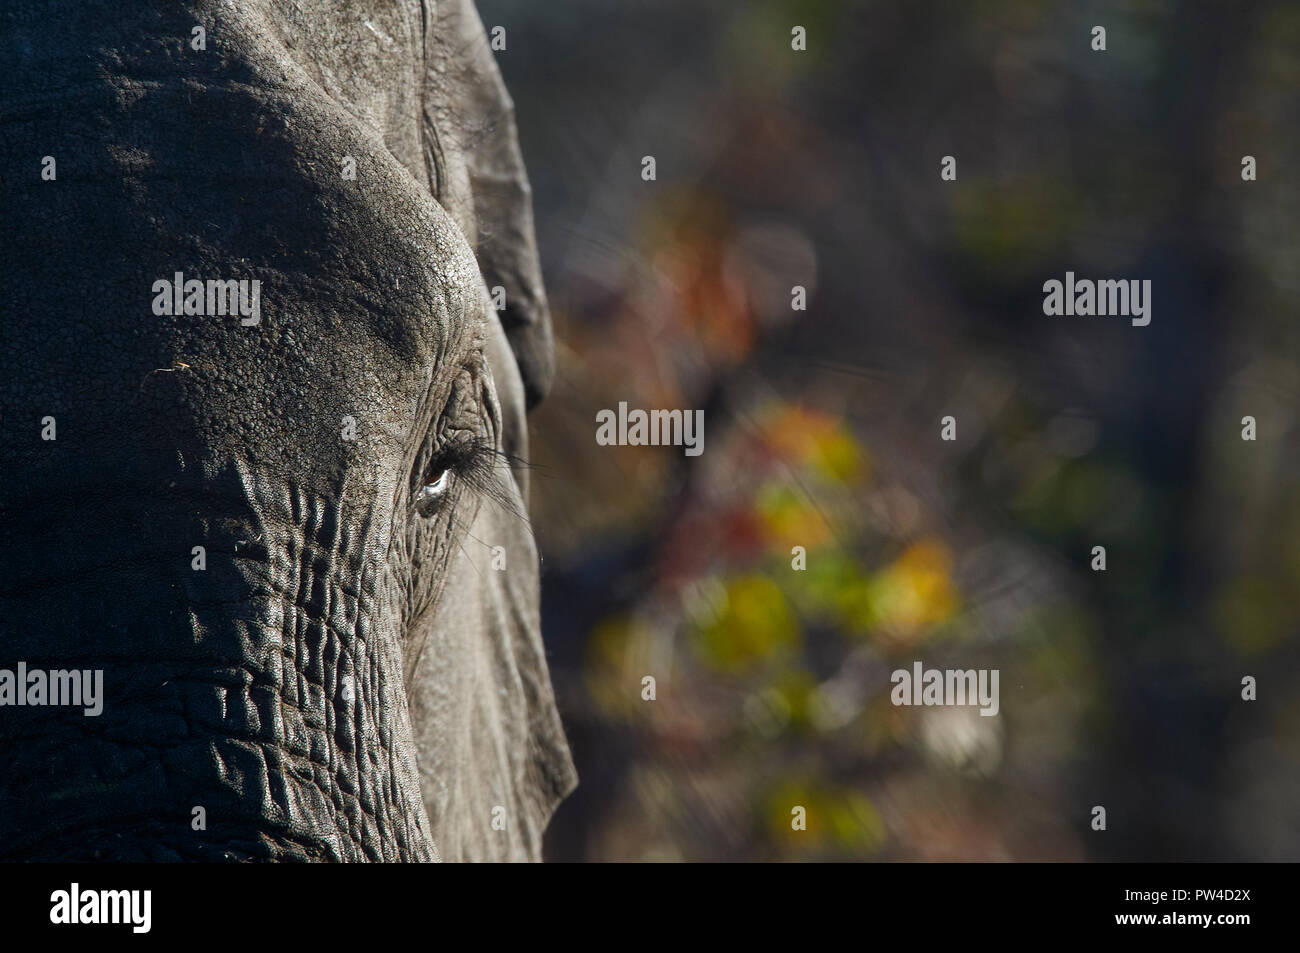 close up of sad elephant and out of focus background Stock Photo